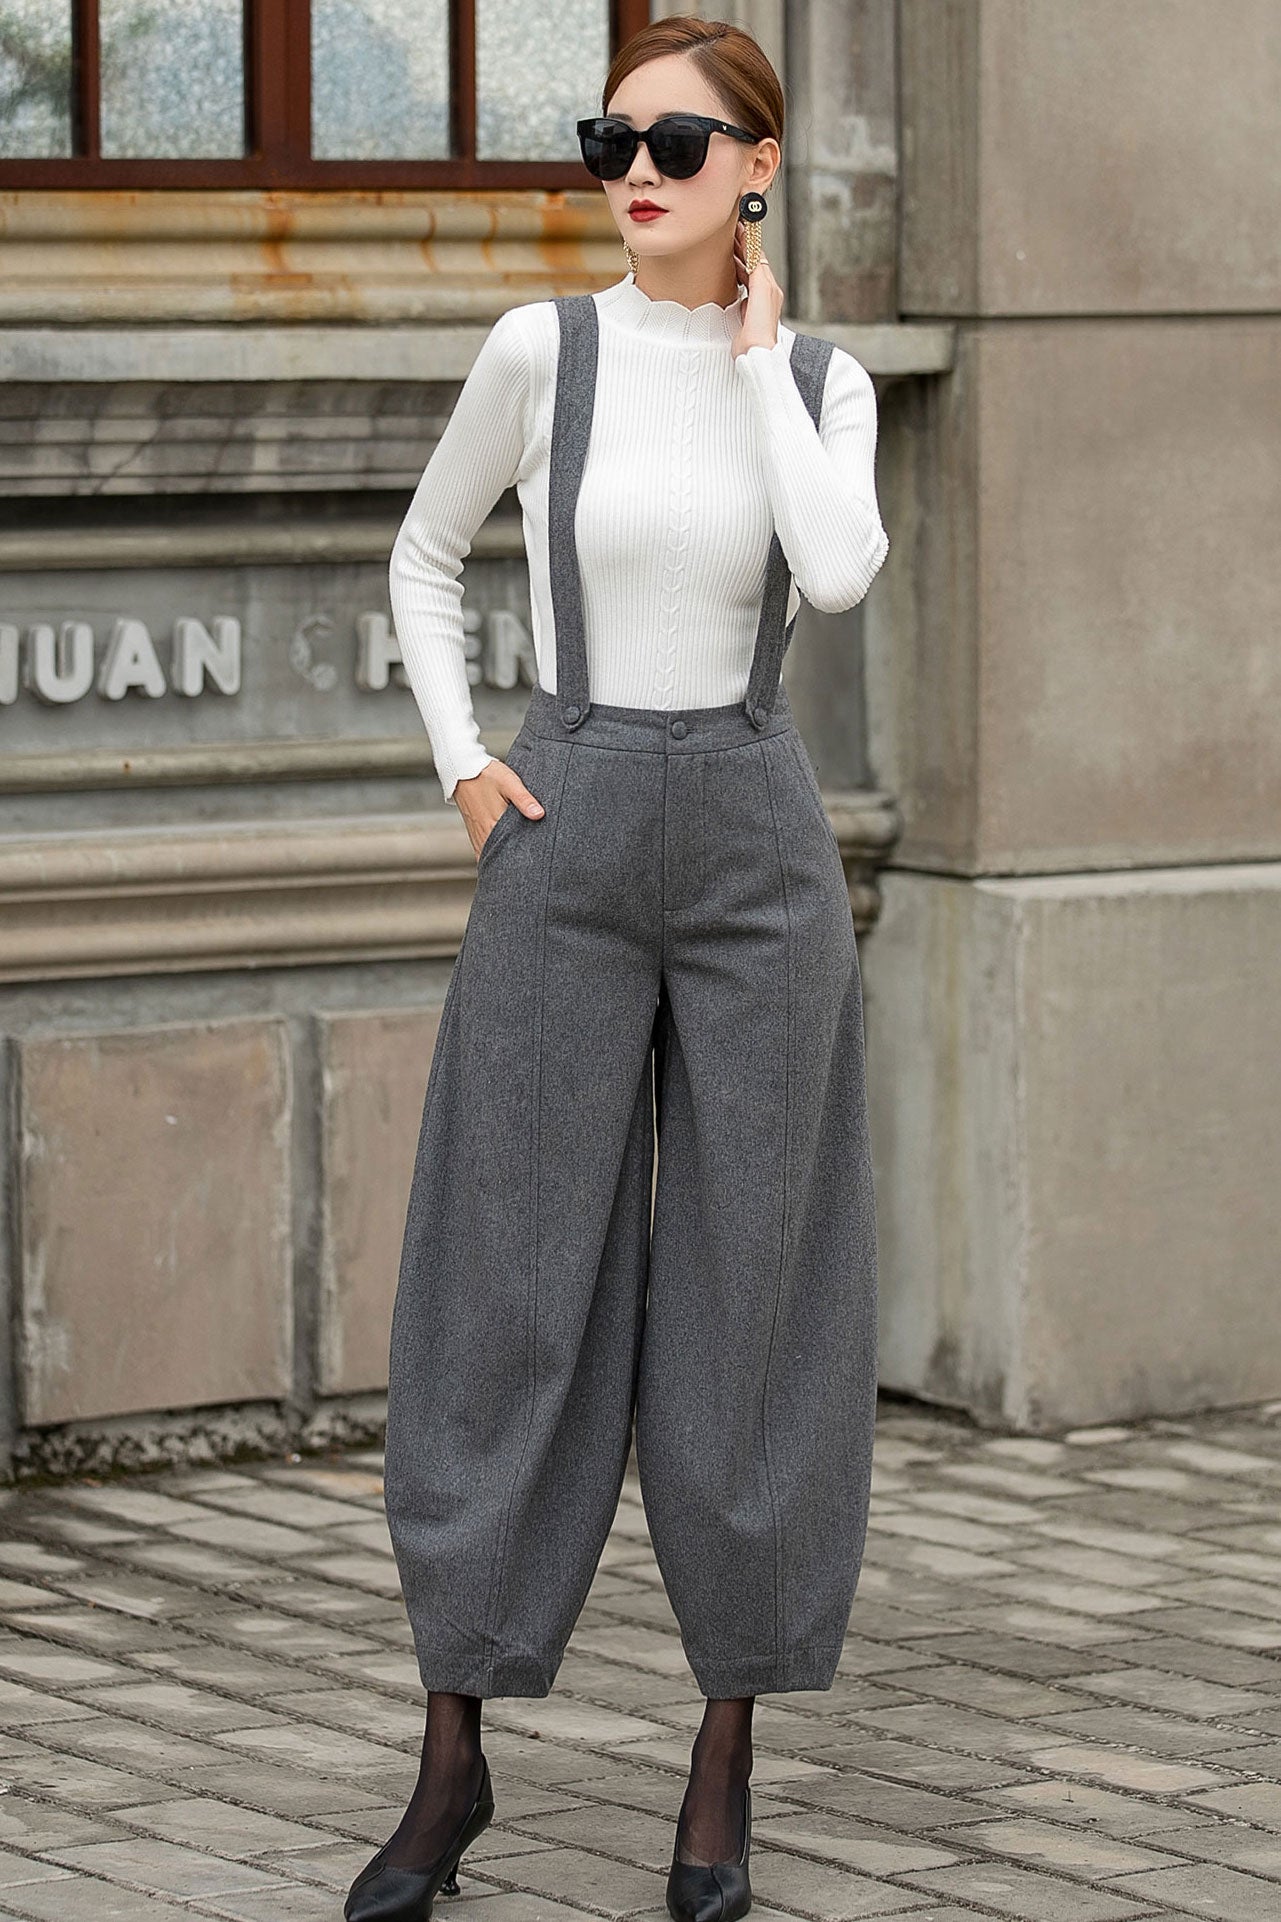 blossomgal - High Waist Wide Leg Pants With Suspender | YesStyle